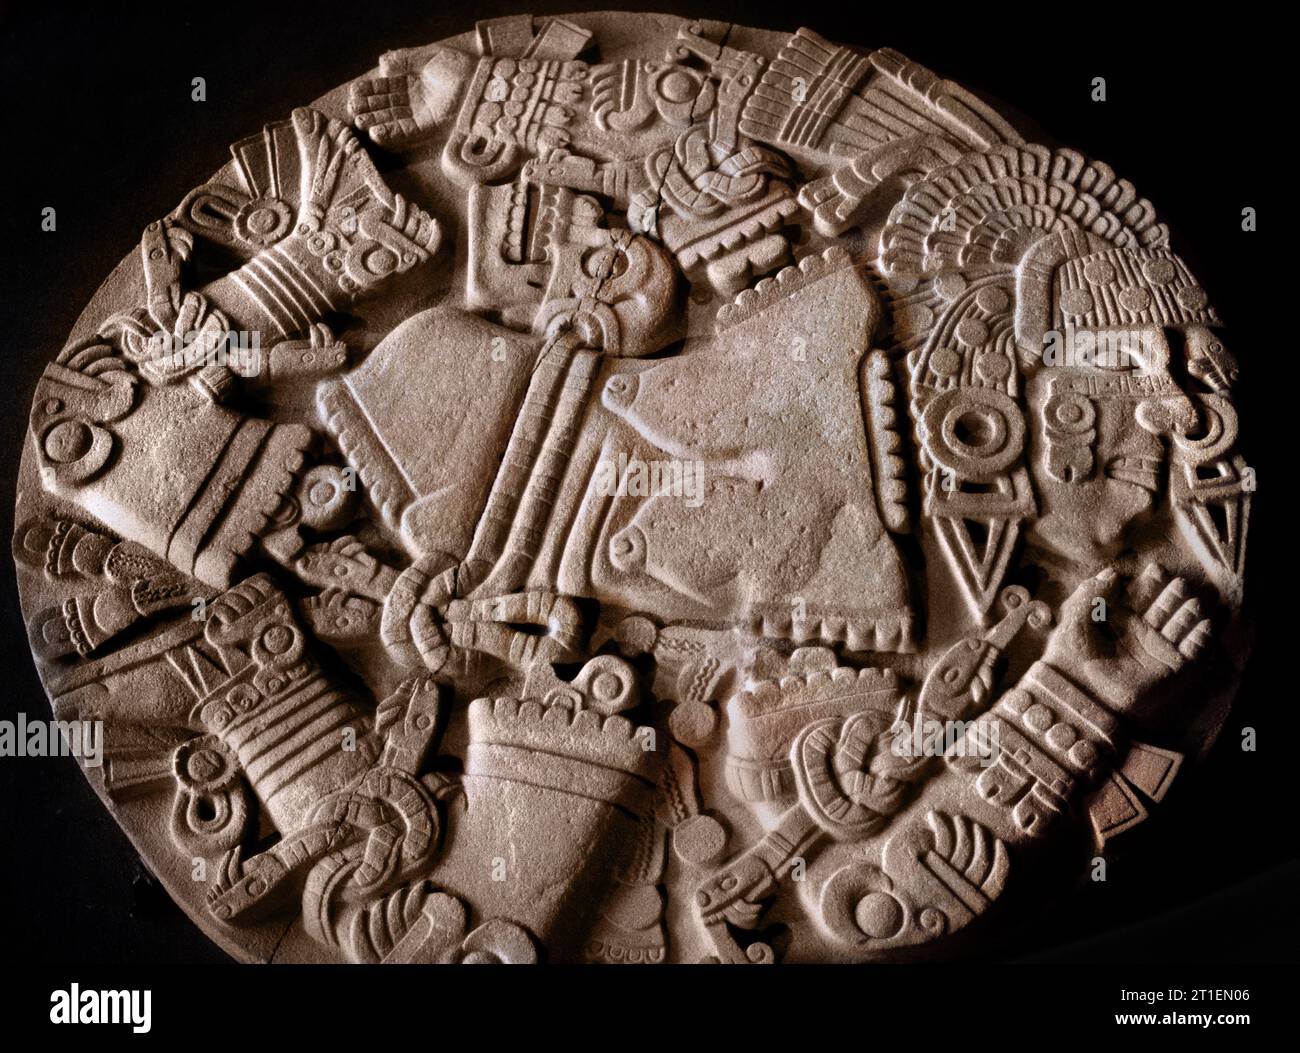 Aztec National Anthropology Museum Mexico City Stock Photo